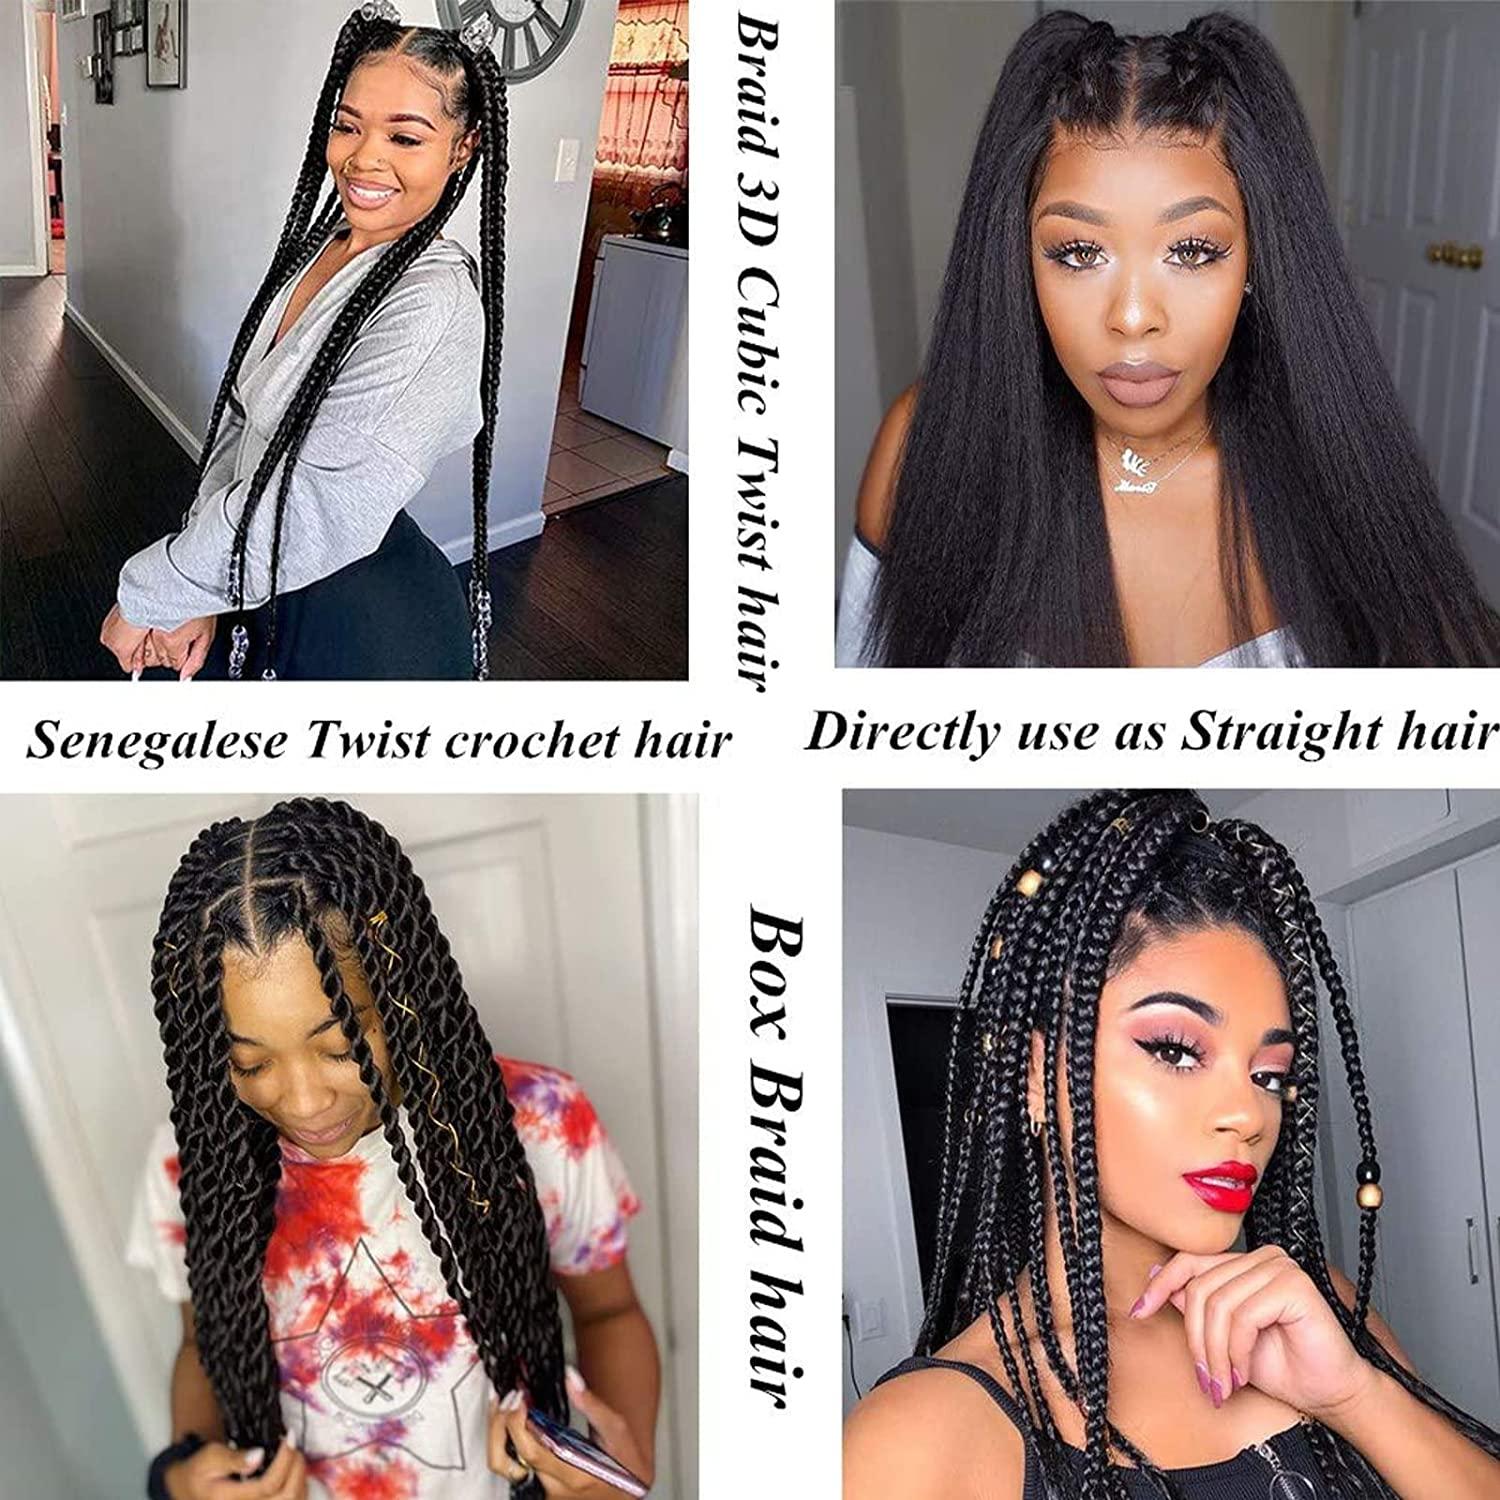 36 Inch Pre-Stretched Braiding Hair - 6 Packs Long Hair For Braids  Professional Yaki Texture Ombre Braiding Hair Extensions Hot Water Setting  Soft Synthetic Crochet Hair (36 inch, 1B/27#/30#/613) 36 Inch (Pack of 6)  1B/27#…